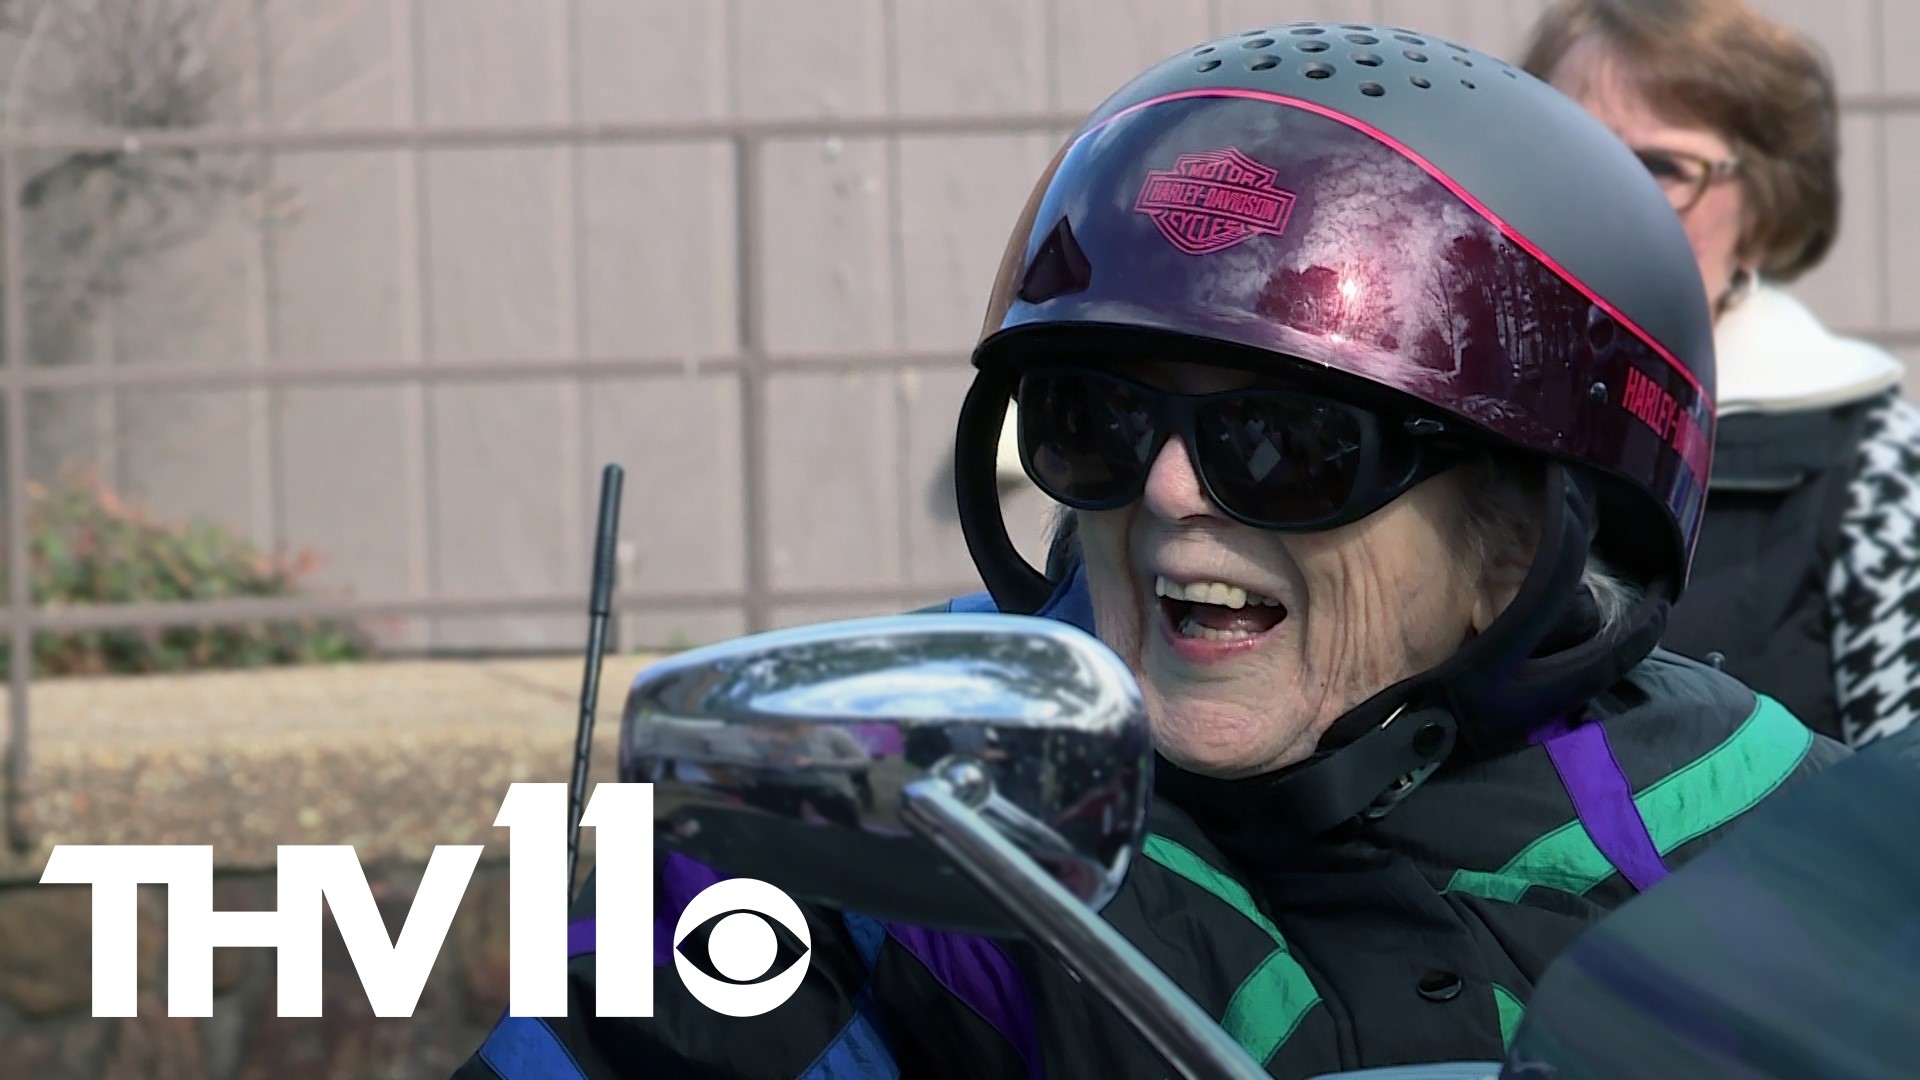 An Arkansas woman is celebrating her birthday in style with a motorcycle tour around town. The catch? She’s 104 years old and celebrating her 26th birthday.